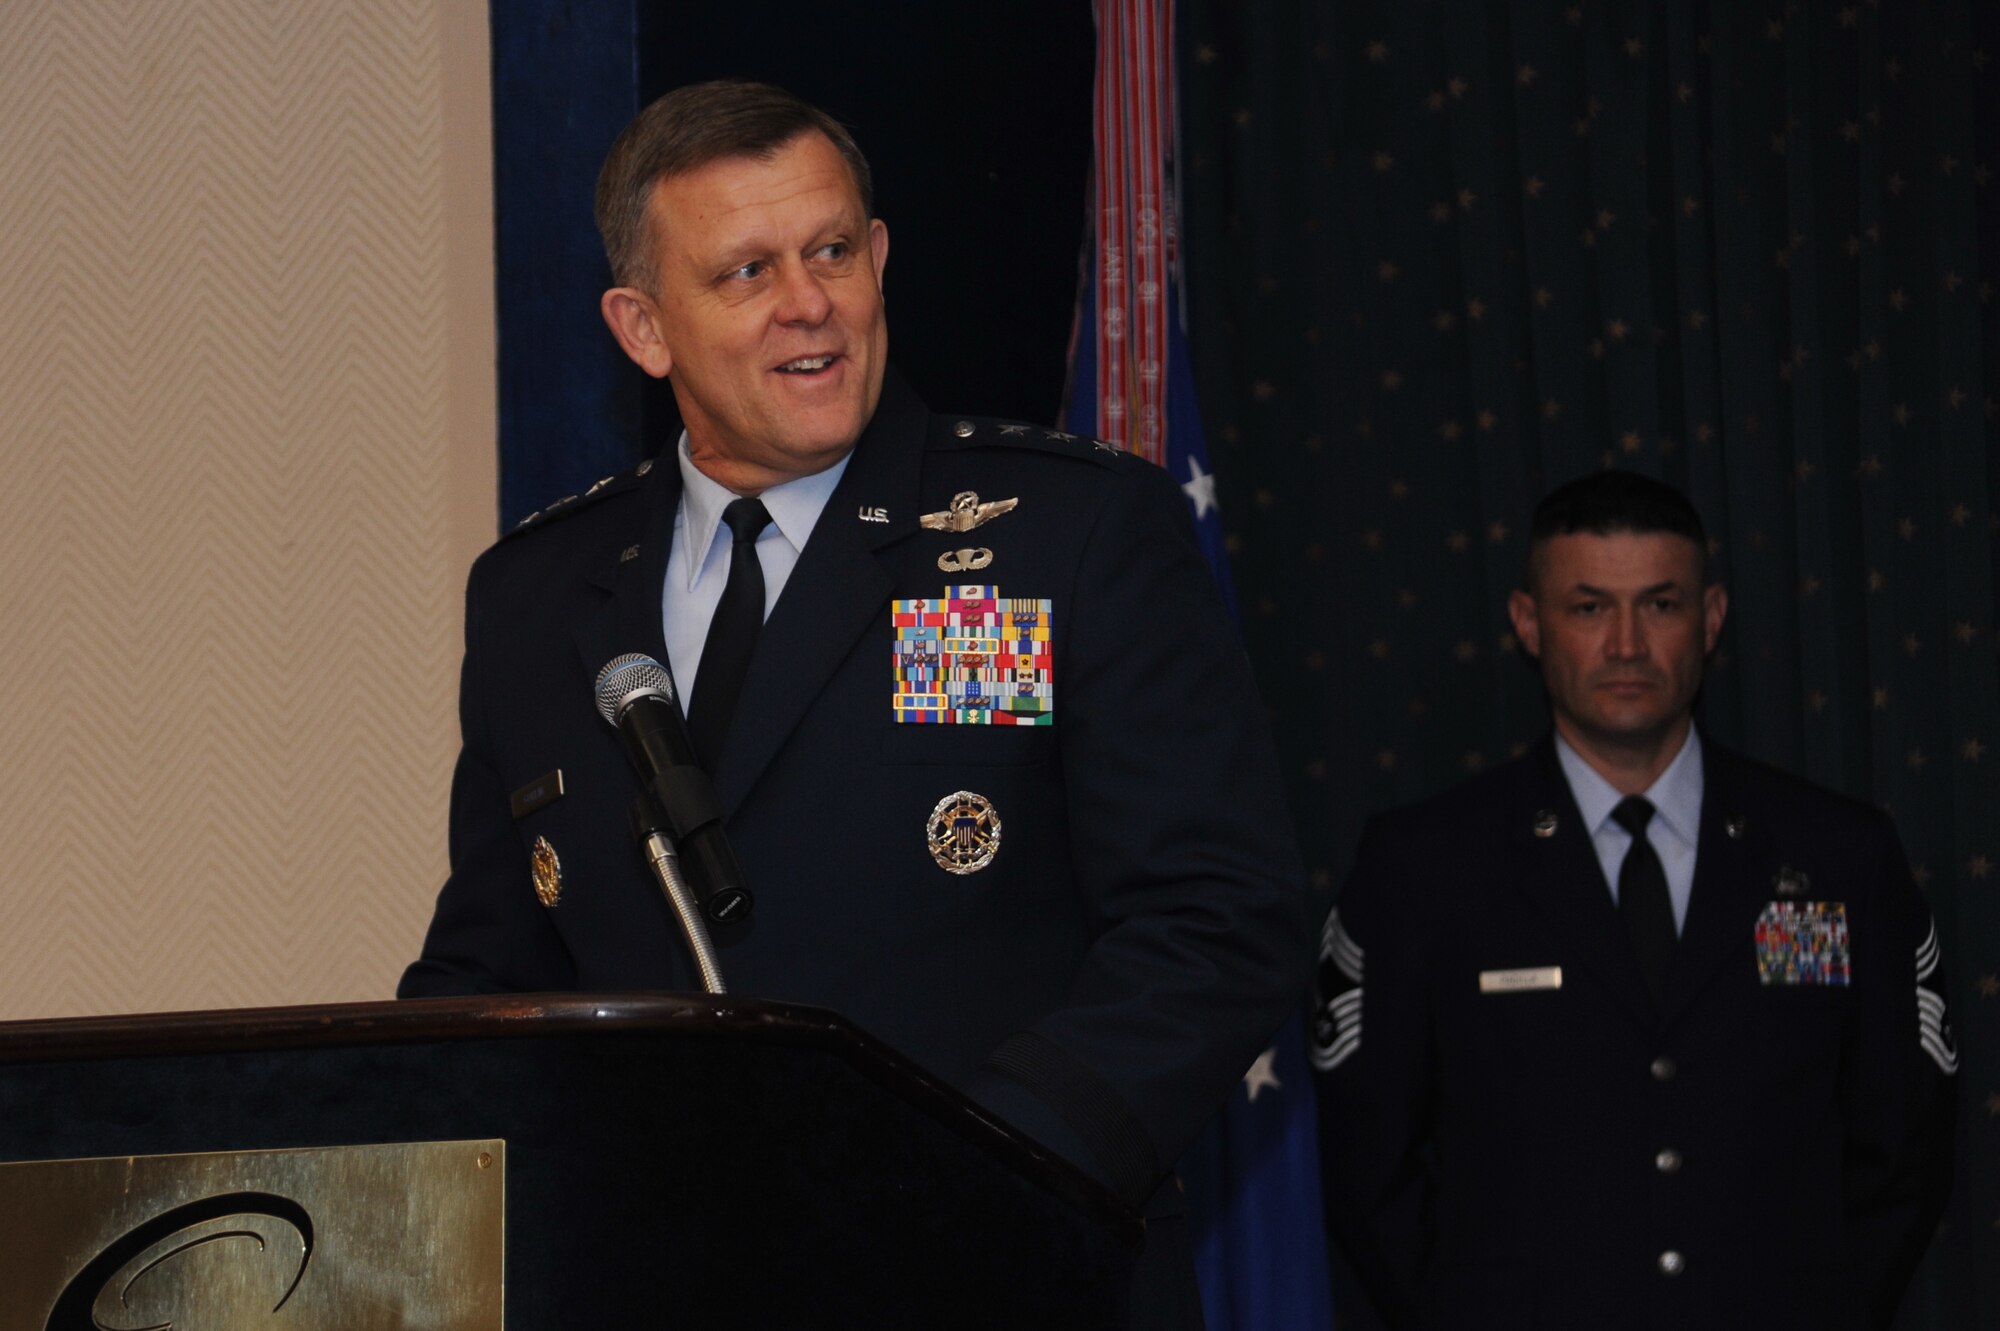 Assistant Vice Chief of Staff of the Air Force Lt. Gen. Frank Gorenc gives remarks during the Sept. 13 Air Force Operational Test and Evaluation Center change of command at Kirtland Air Force Base, N.M. (U.S. Air Force photo/Ken C. Moore)